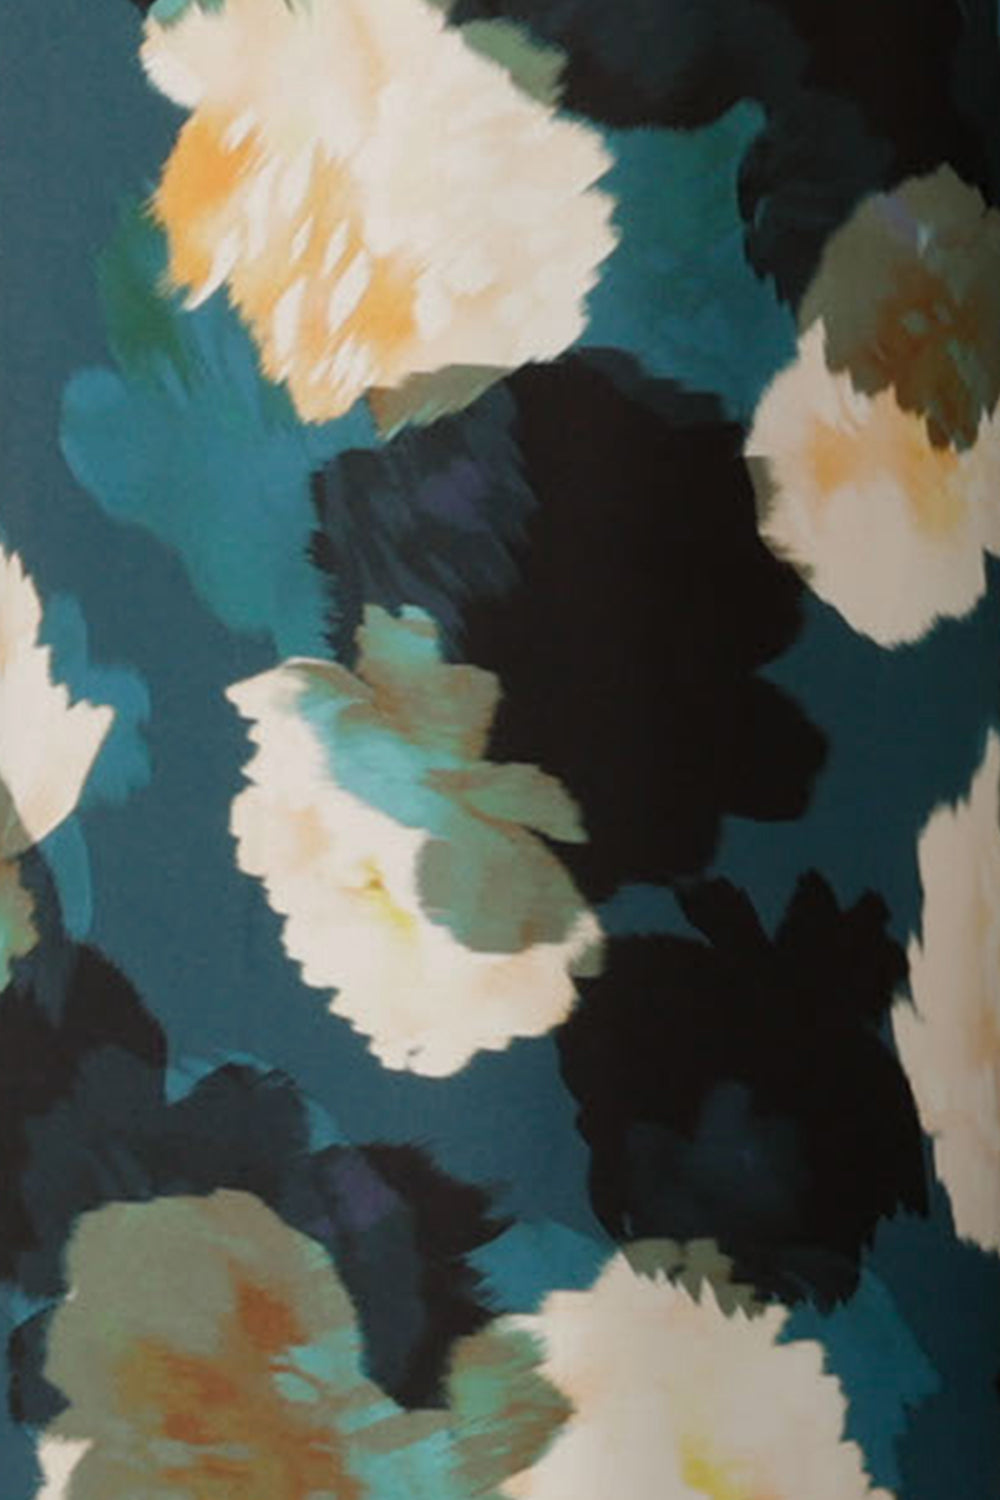 swatch of australian and new zealand women's clothing brand, L&F's sustainable Tencel fabric in a navy, teal and white digital print, and used in a range of women's work wear tailored pants and jacket